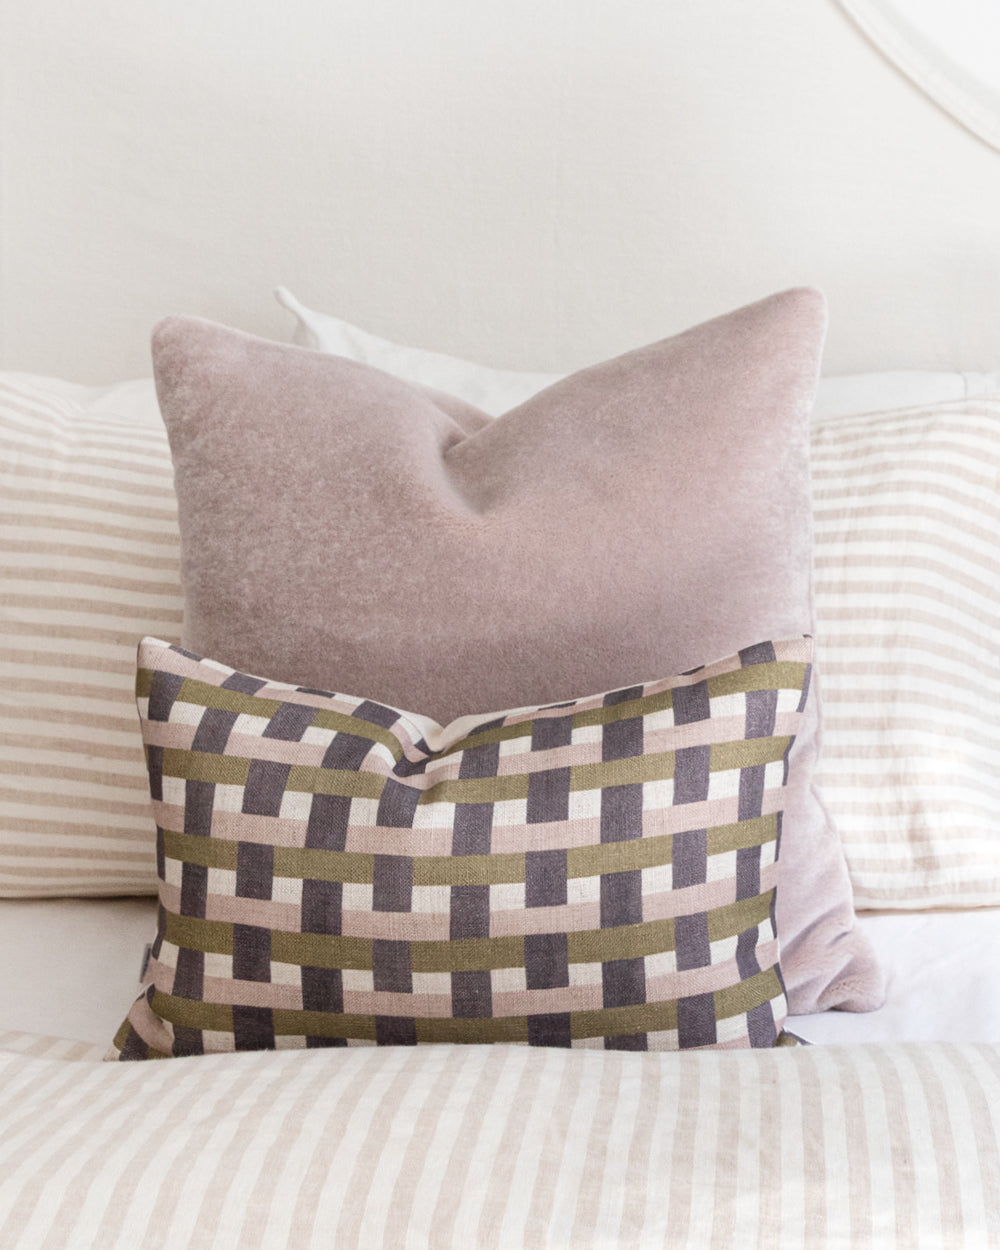 Plum, mauve and olive green check printed pillow sitting on bed with complimentary pink mohair pillow